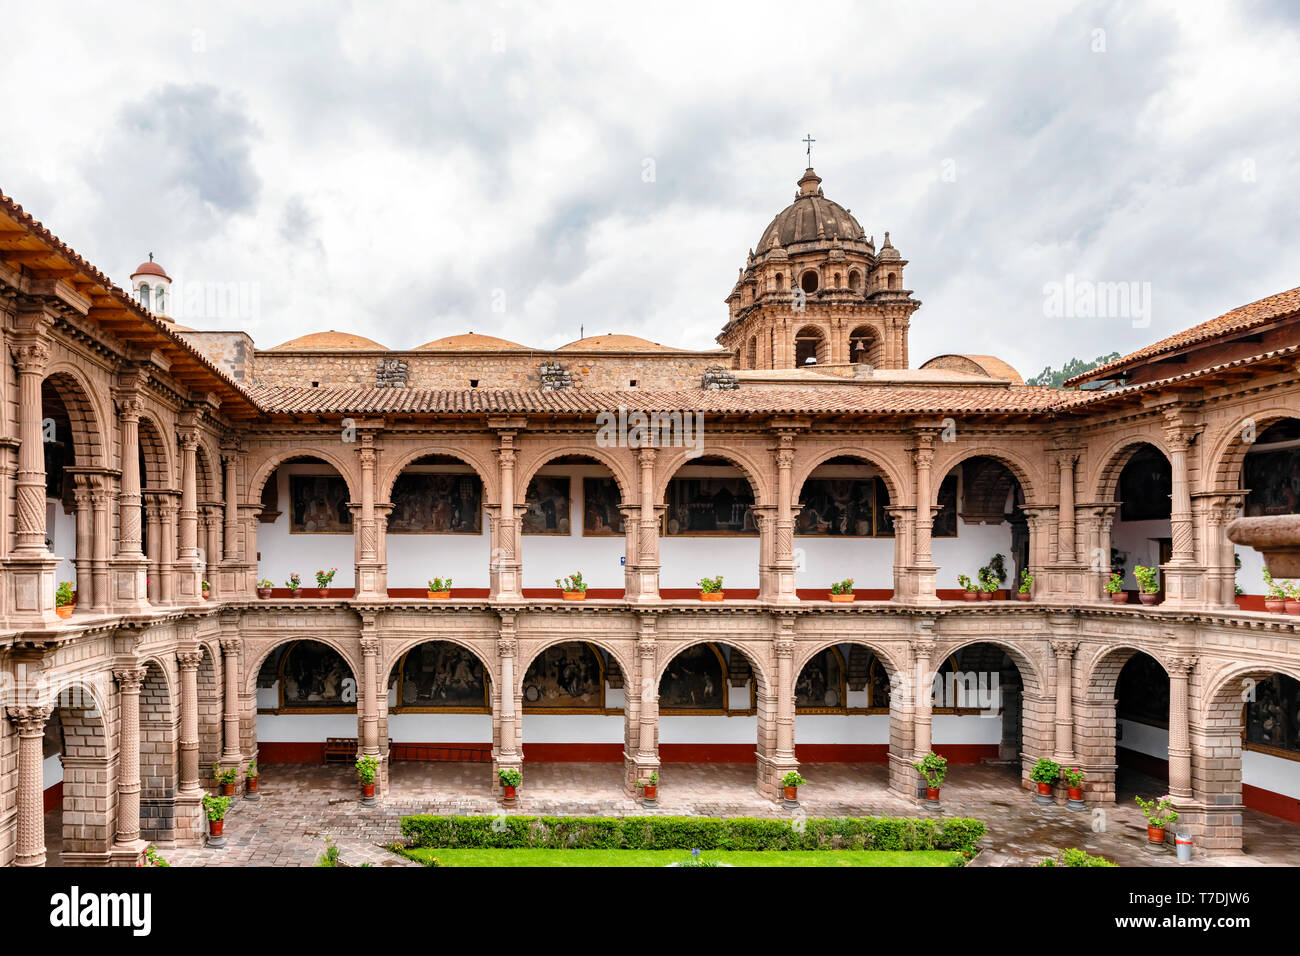 Cusco, Peru - April 3, 2019: Courtyard of Convent of Order of Our Lady of Mercy located in Plaza Espinar, in the historic center of the Cusco city, Pe Stock Photo